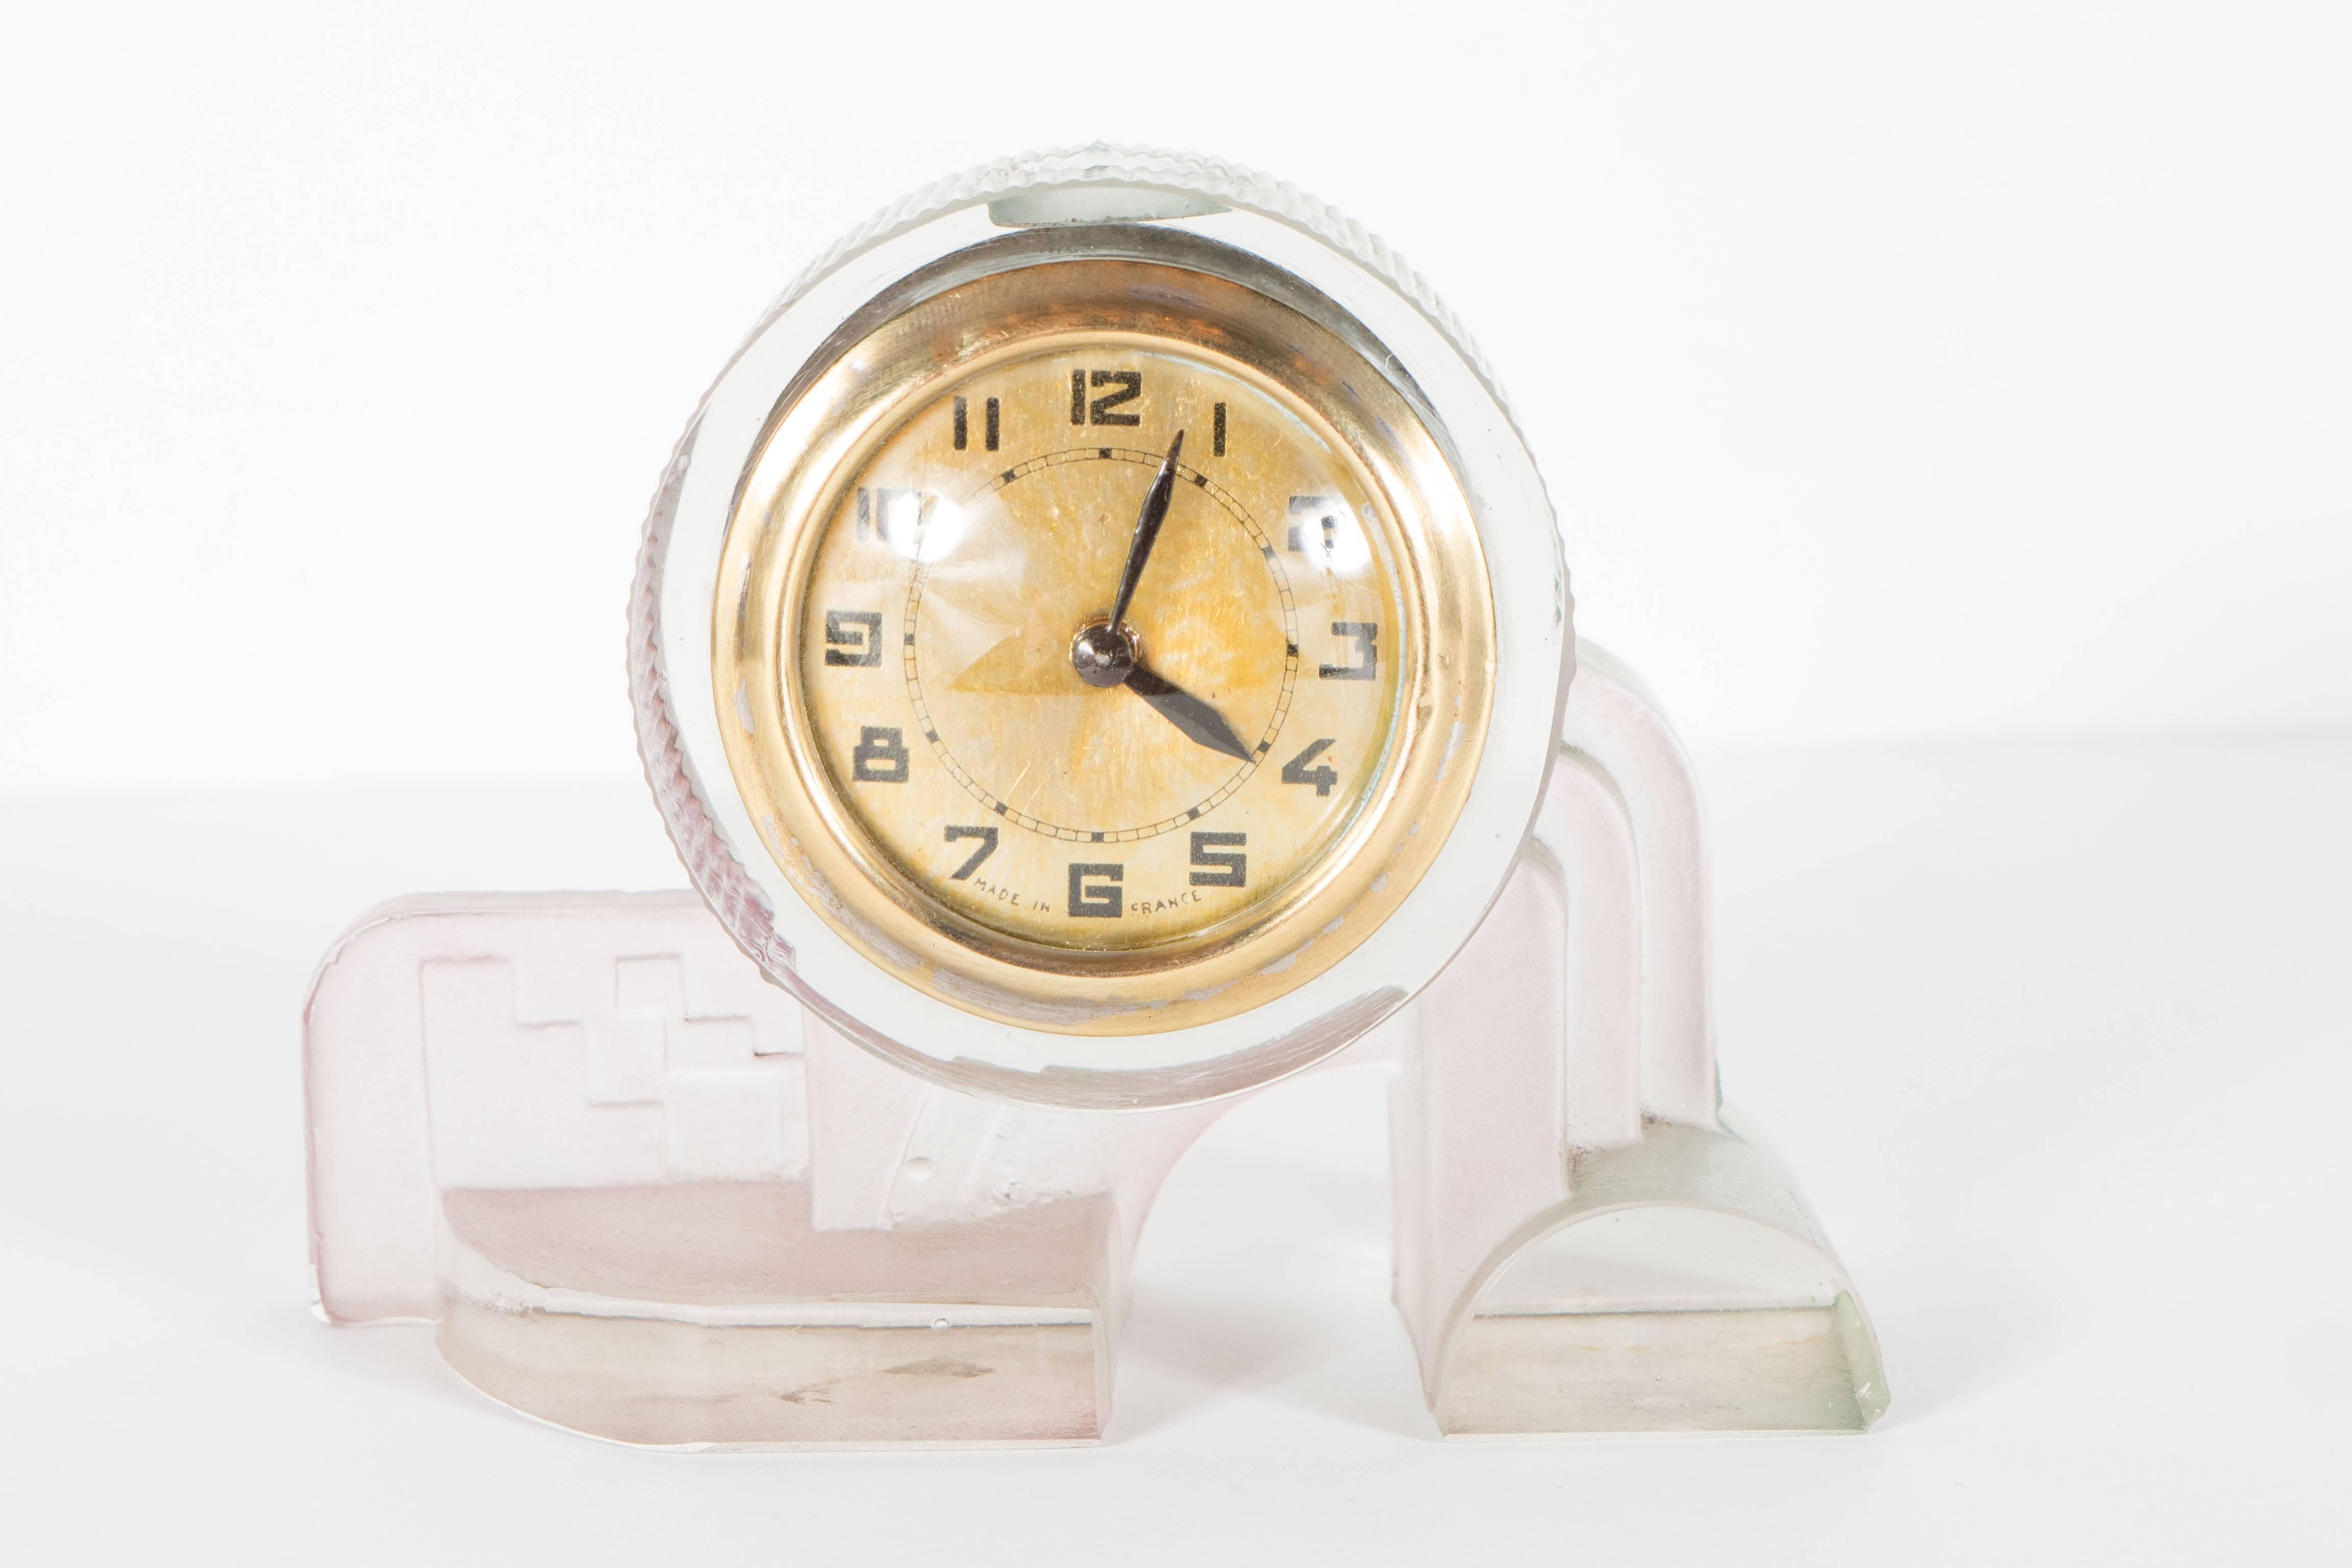 A French Art Deco table or desk clock in pale and rose celadon pressed glass. A geometric cubist base supports a ribbed clock. The entire piece is comprised of slightly hued pressed glass. Wind-up mechanism intact and functional. A beautiful piece